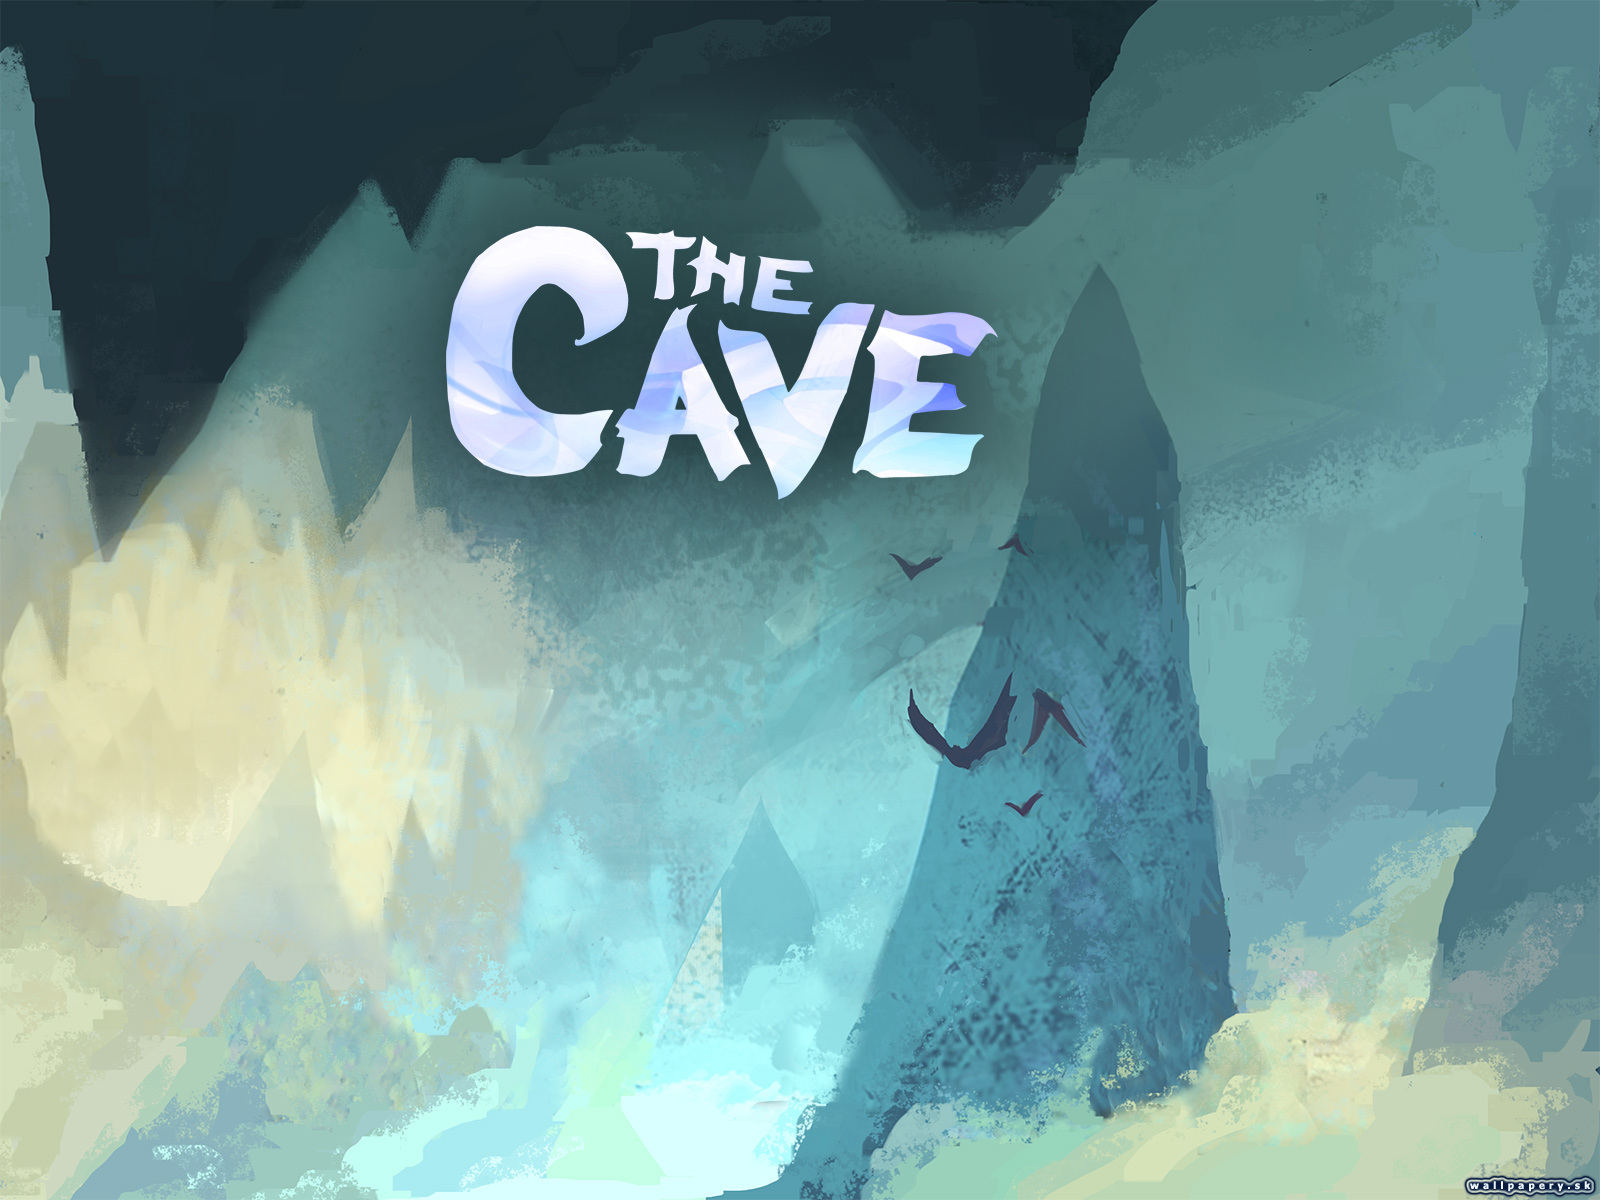 The Cave - wallpaper 2